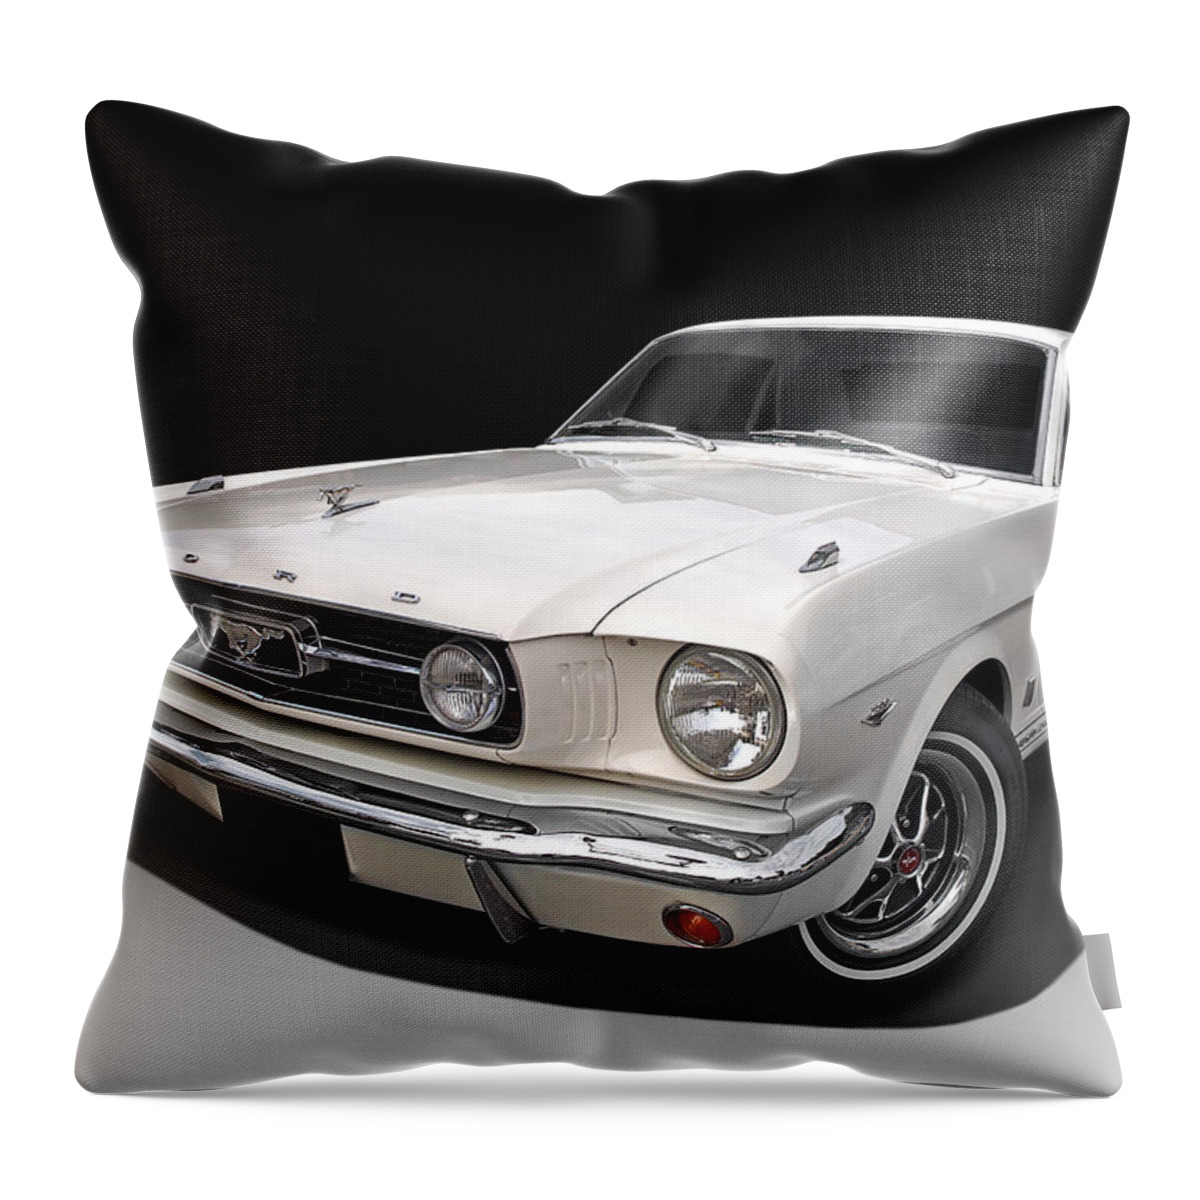 Mustang Throw Pillow featuring the photograph White 1966 Mustang by Gill Billington